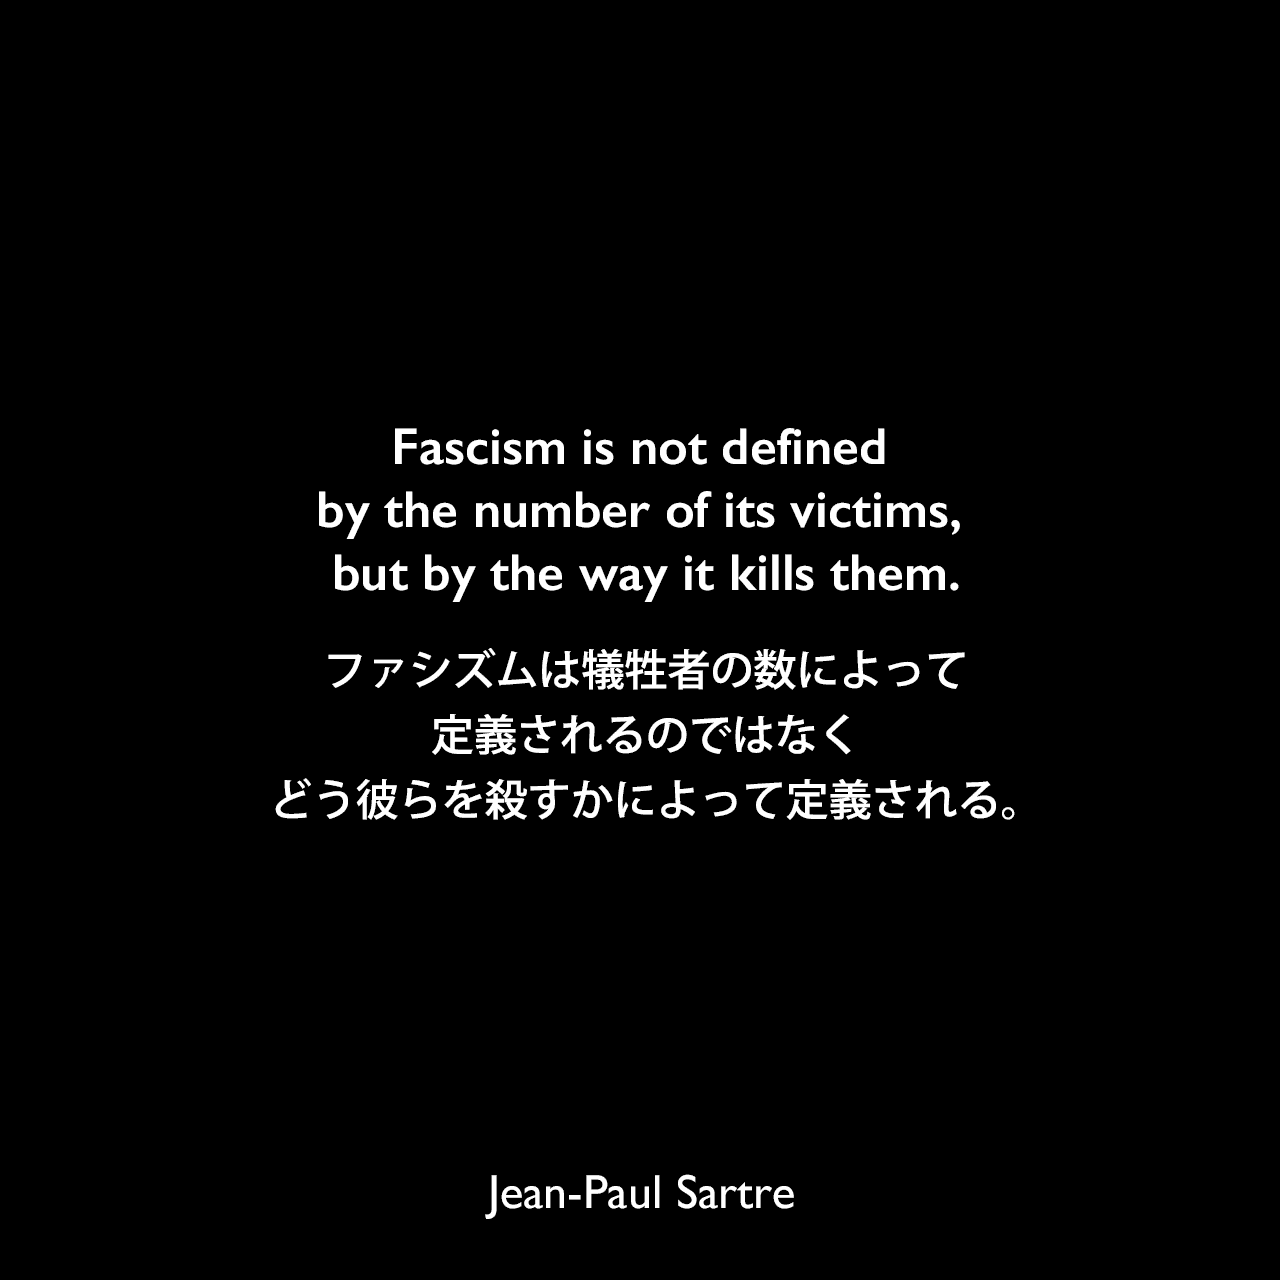 Fascism is not defined by the number of its victims, but by the way it kills them.ファシズムは犠牲者の数によって定義されるのではなく、どう彼らを殺すかによって定義される。Jean-Paul Sartre